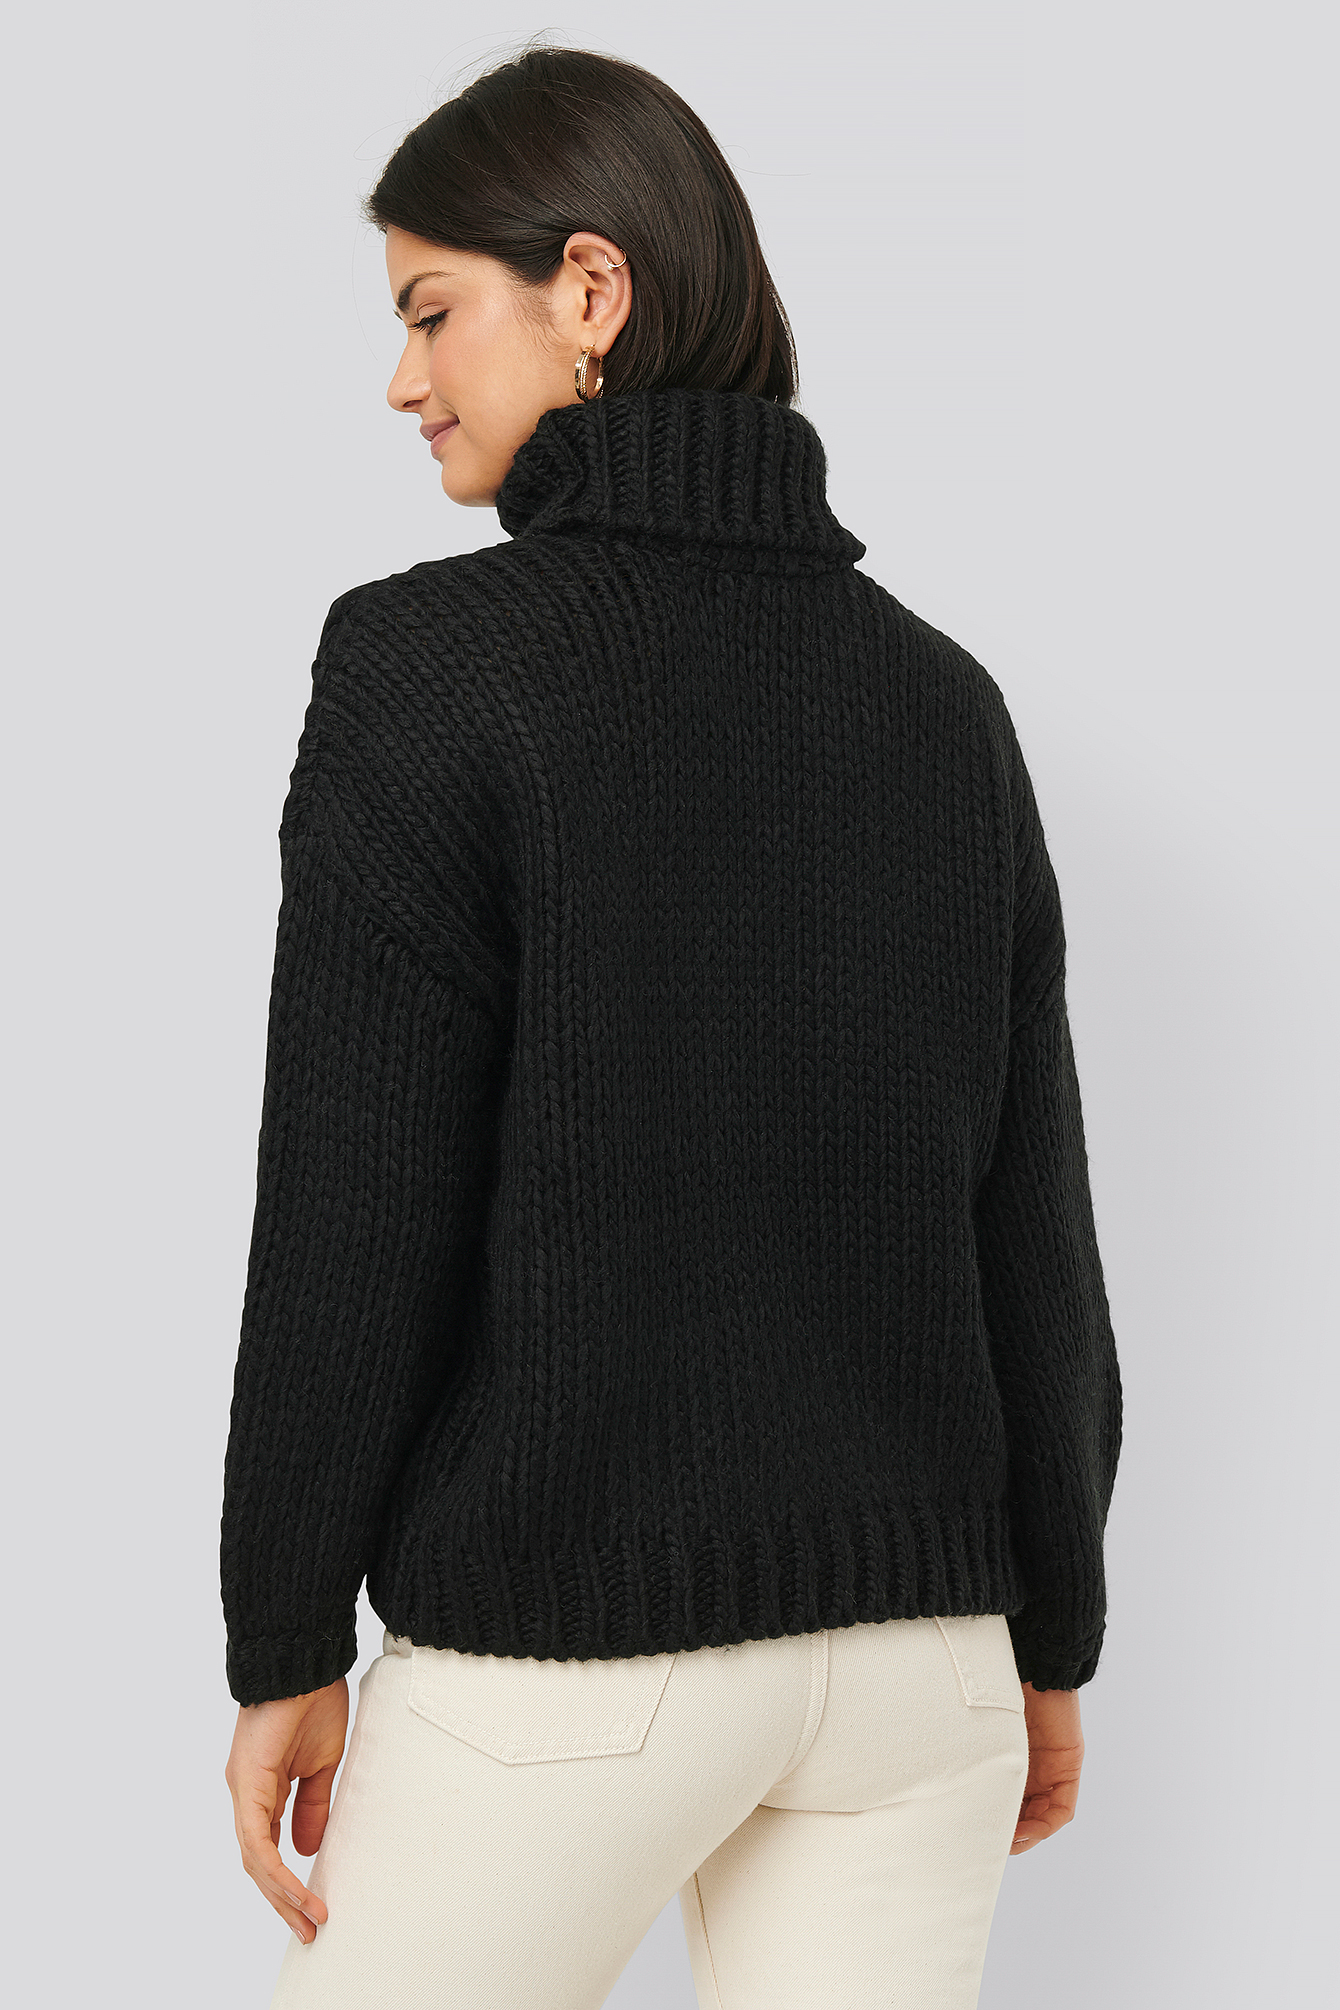 Black Wool Blend High Neck Heavy Cable Knitted Sweater